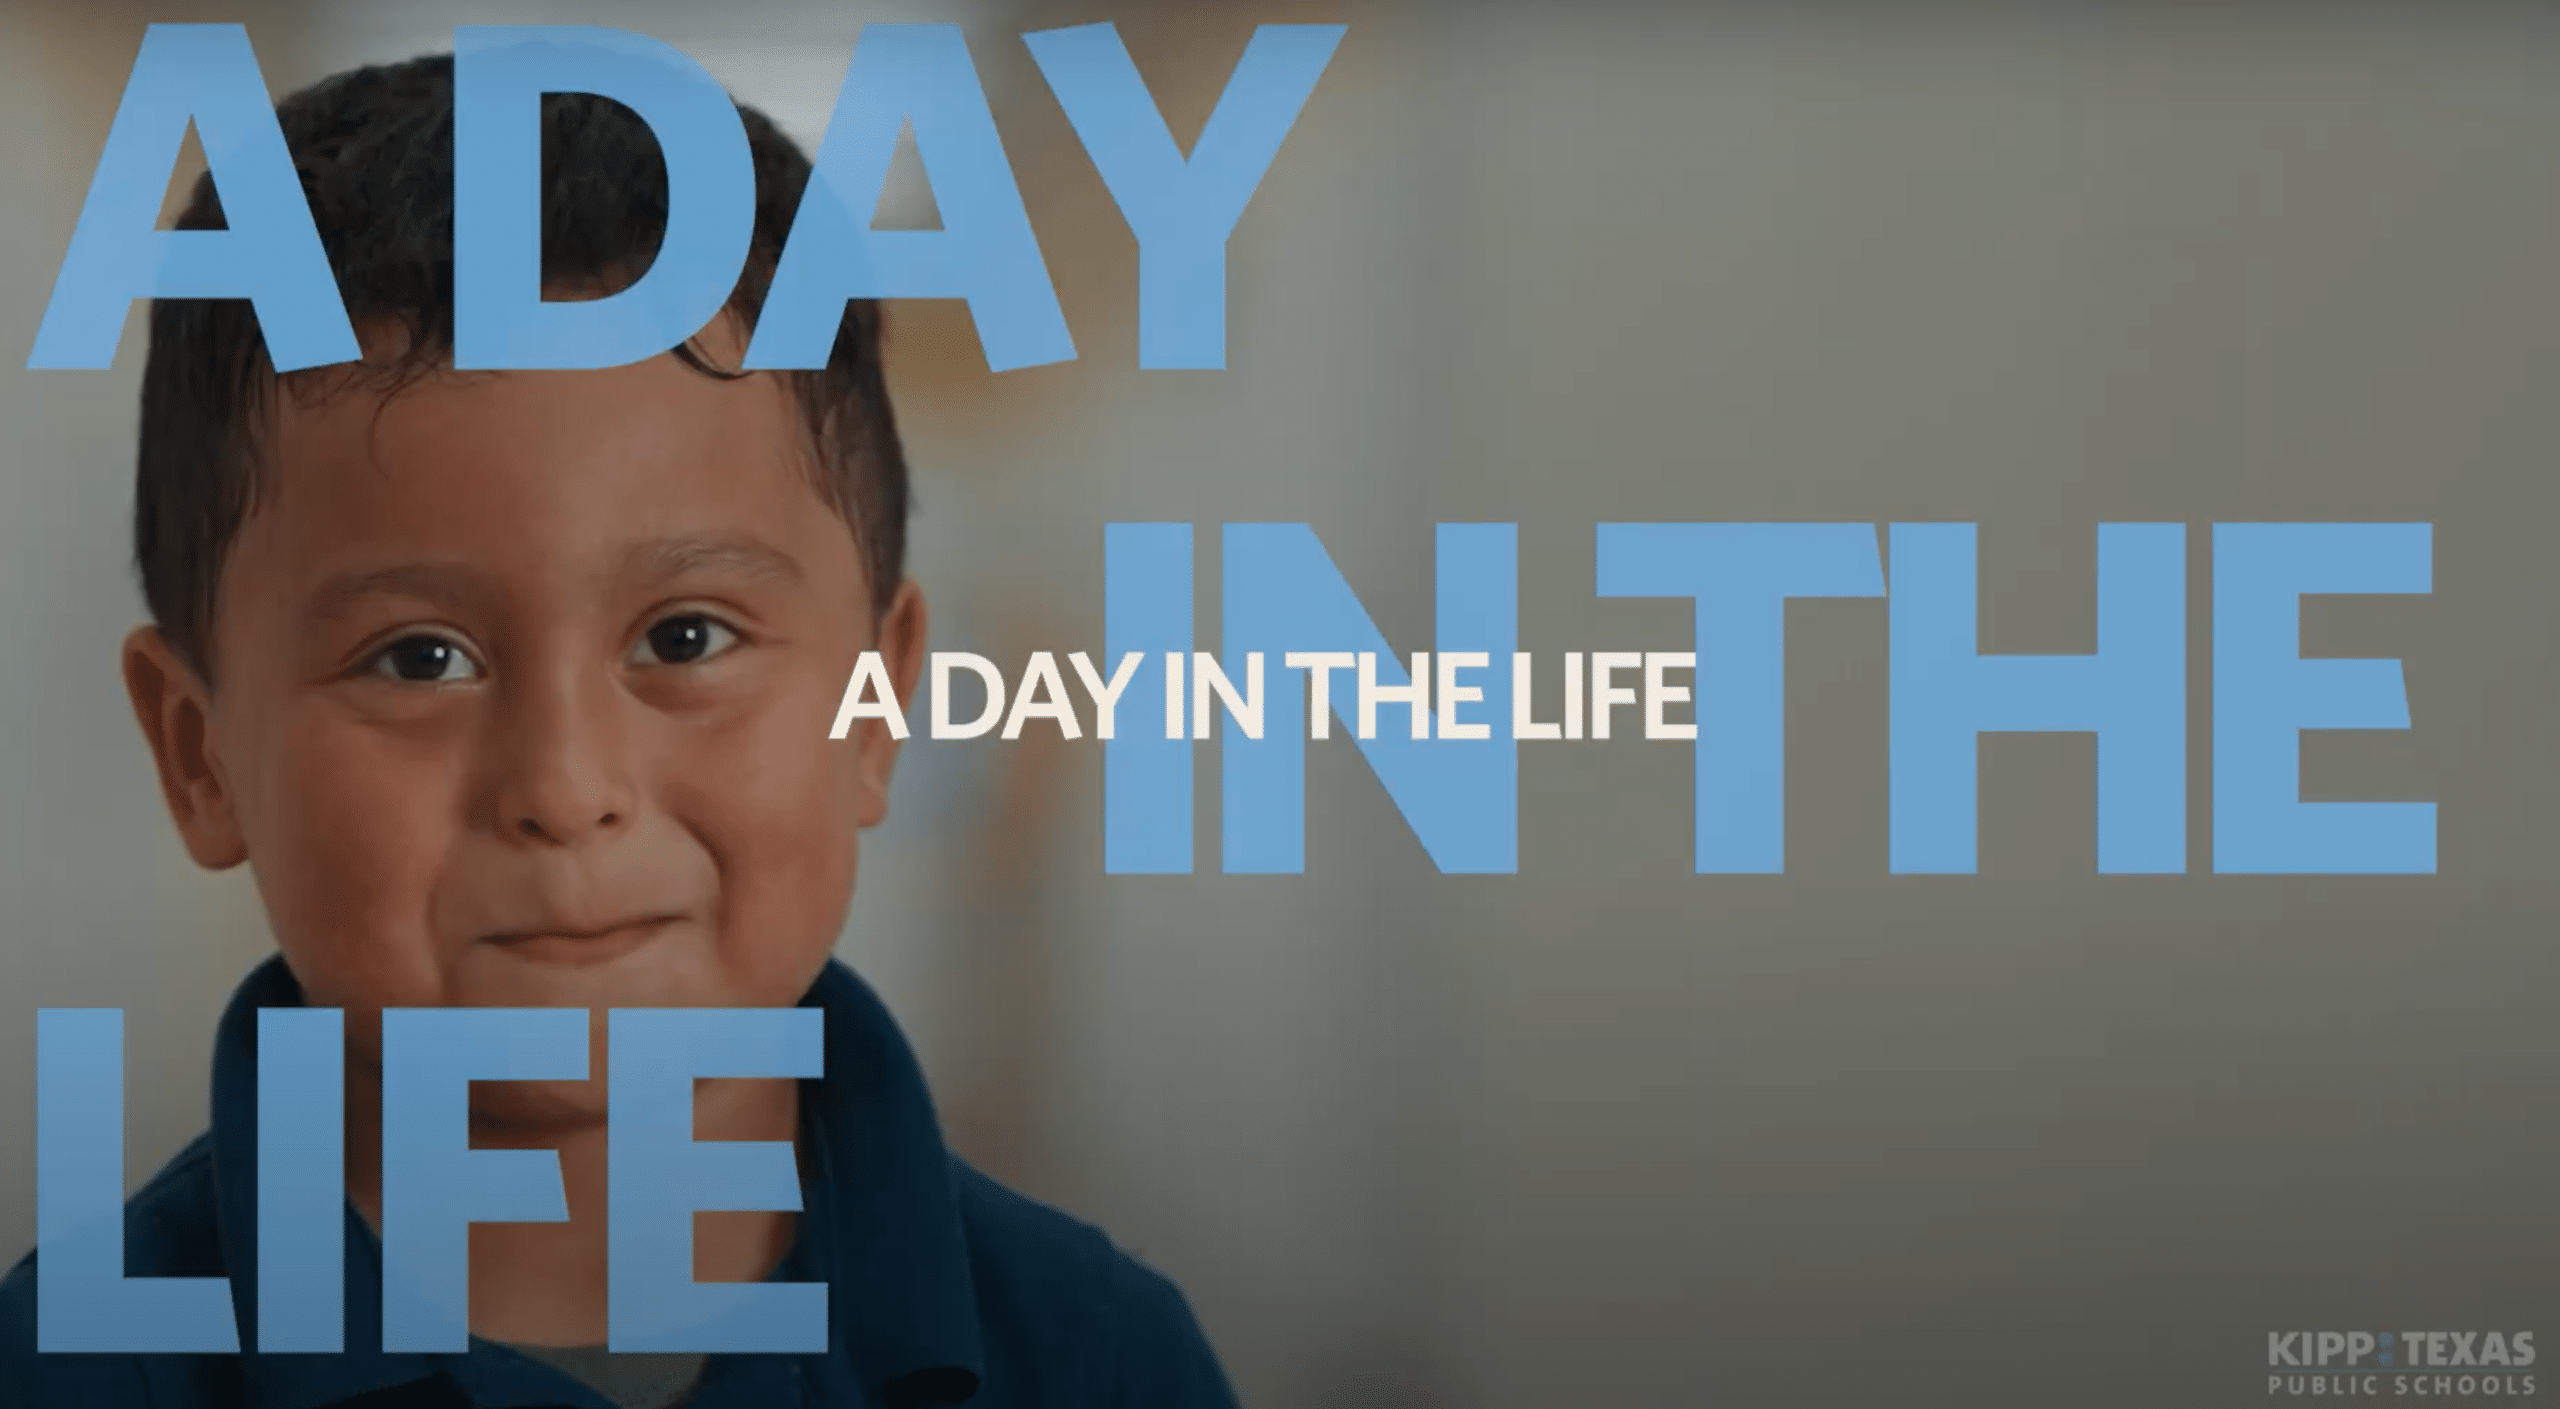 A day in the life at KIPP